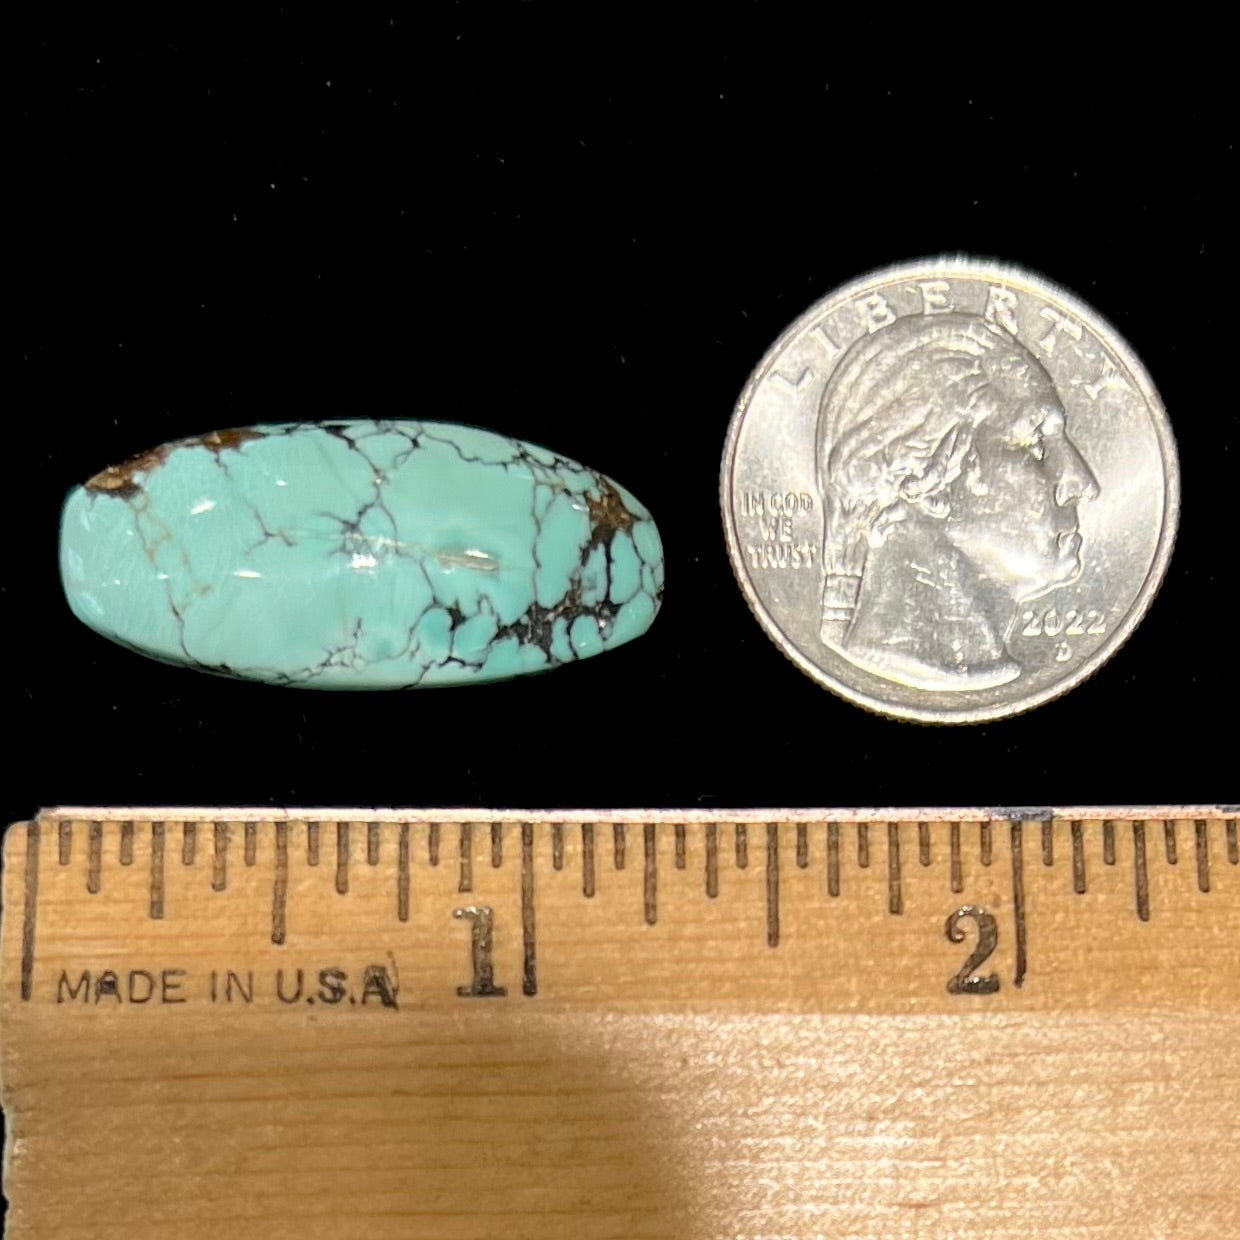 A loose, barrel cabochon cut Courtland-Gleeson turquoise stone.  The stone is greenish blue with black and brown matrix.